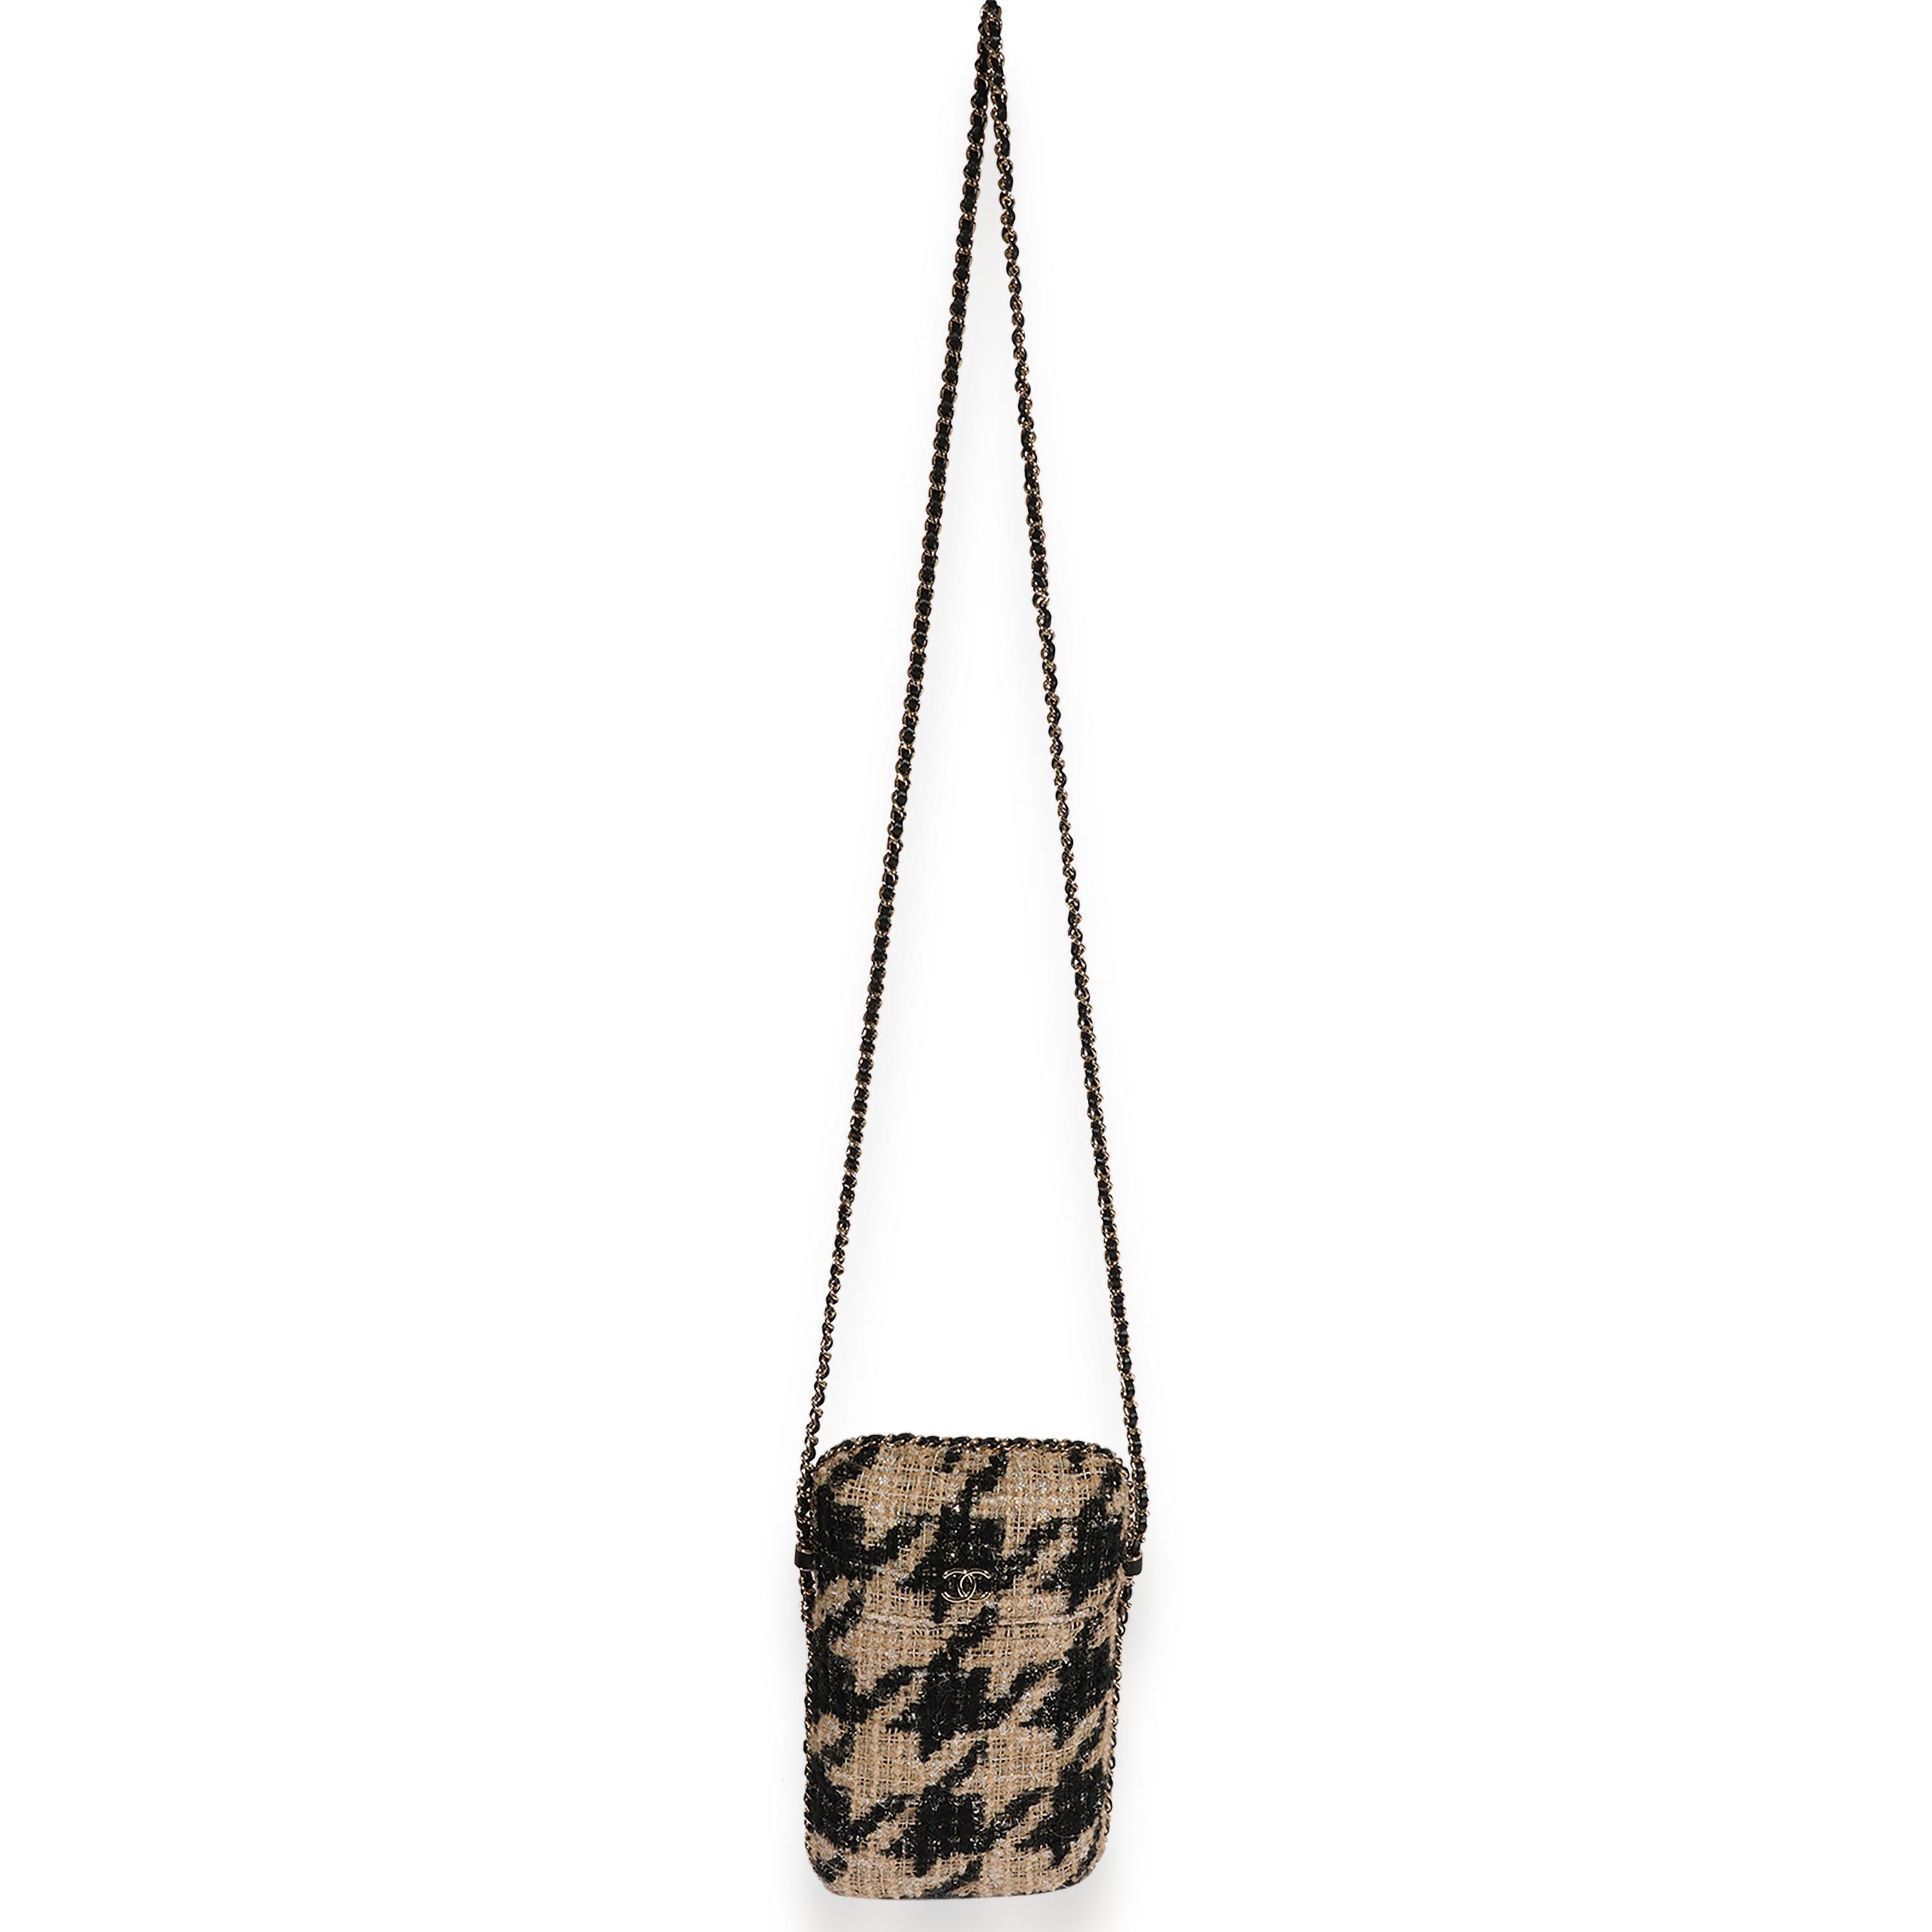 Listing Title: Chanel Metallic Houndstooth Print Tweed Phone Holder Crossbody
SKU: 123009
Condition: Pre-owned 
Handbag Condition: Excellent
Condition Comments: Excellent Condition. Light scuffing at interior. No other signs of wear.
Brand: